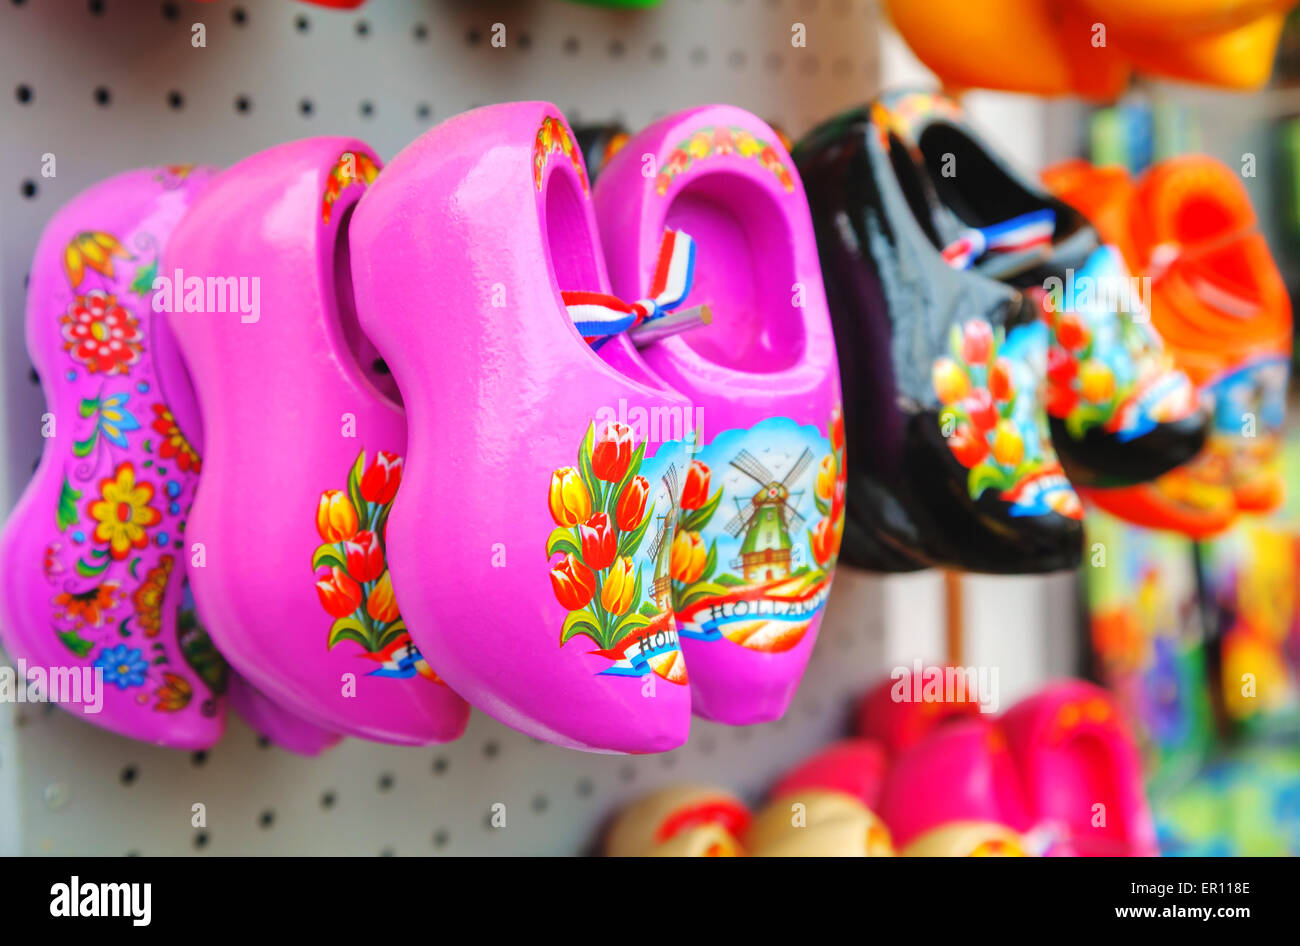 AMSTERDAM - APRIL 17: Colourful traditional Dutch wooden shoes (klomps) on April 17, 2015 in Amsterdam. Stock Photo